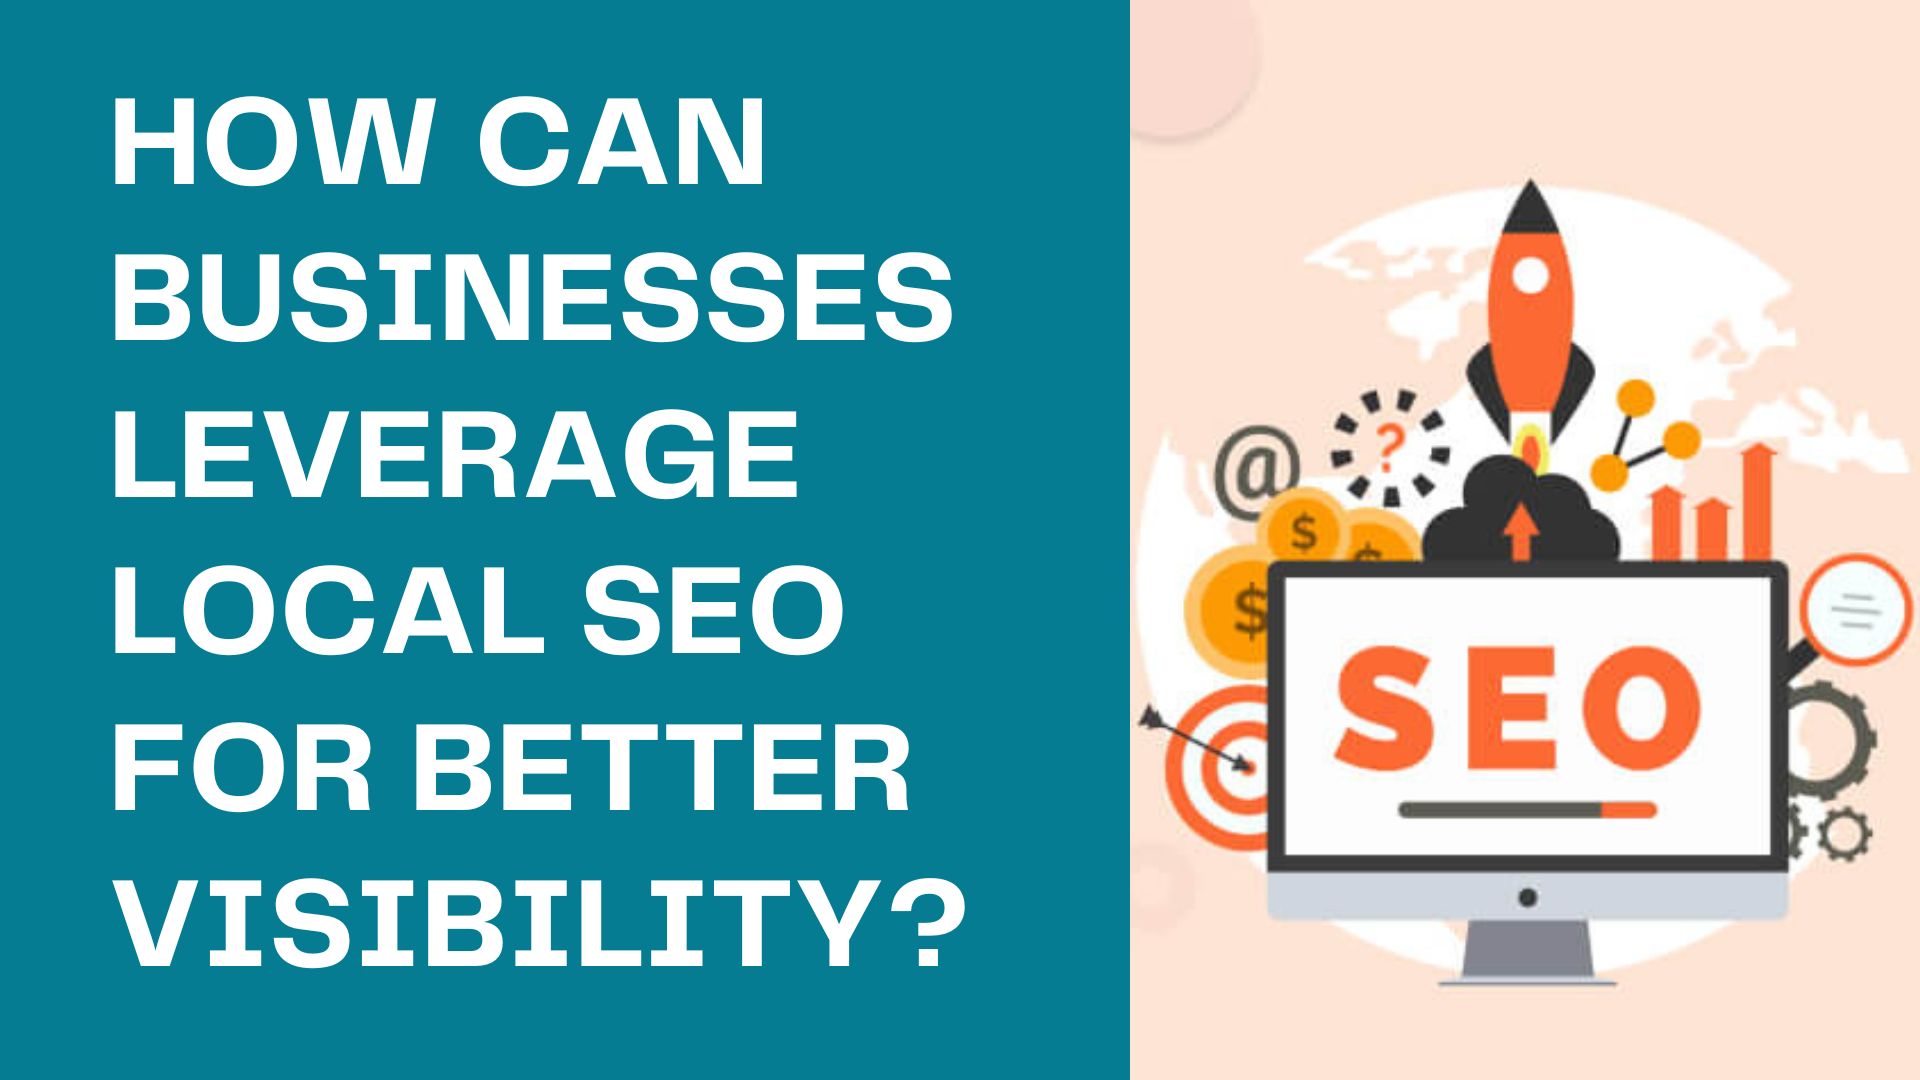 How can businesses leverage local SEO for better visibility?